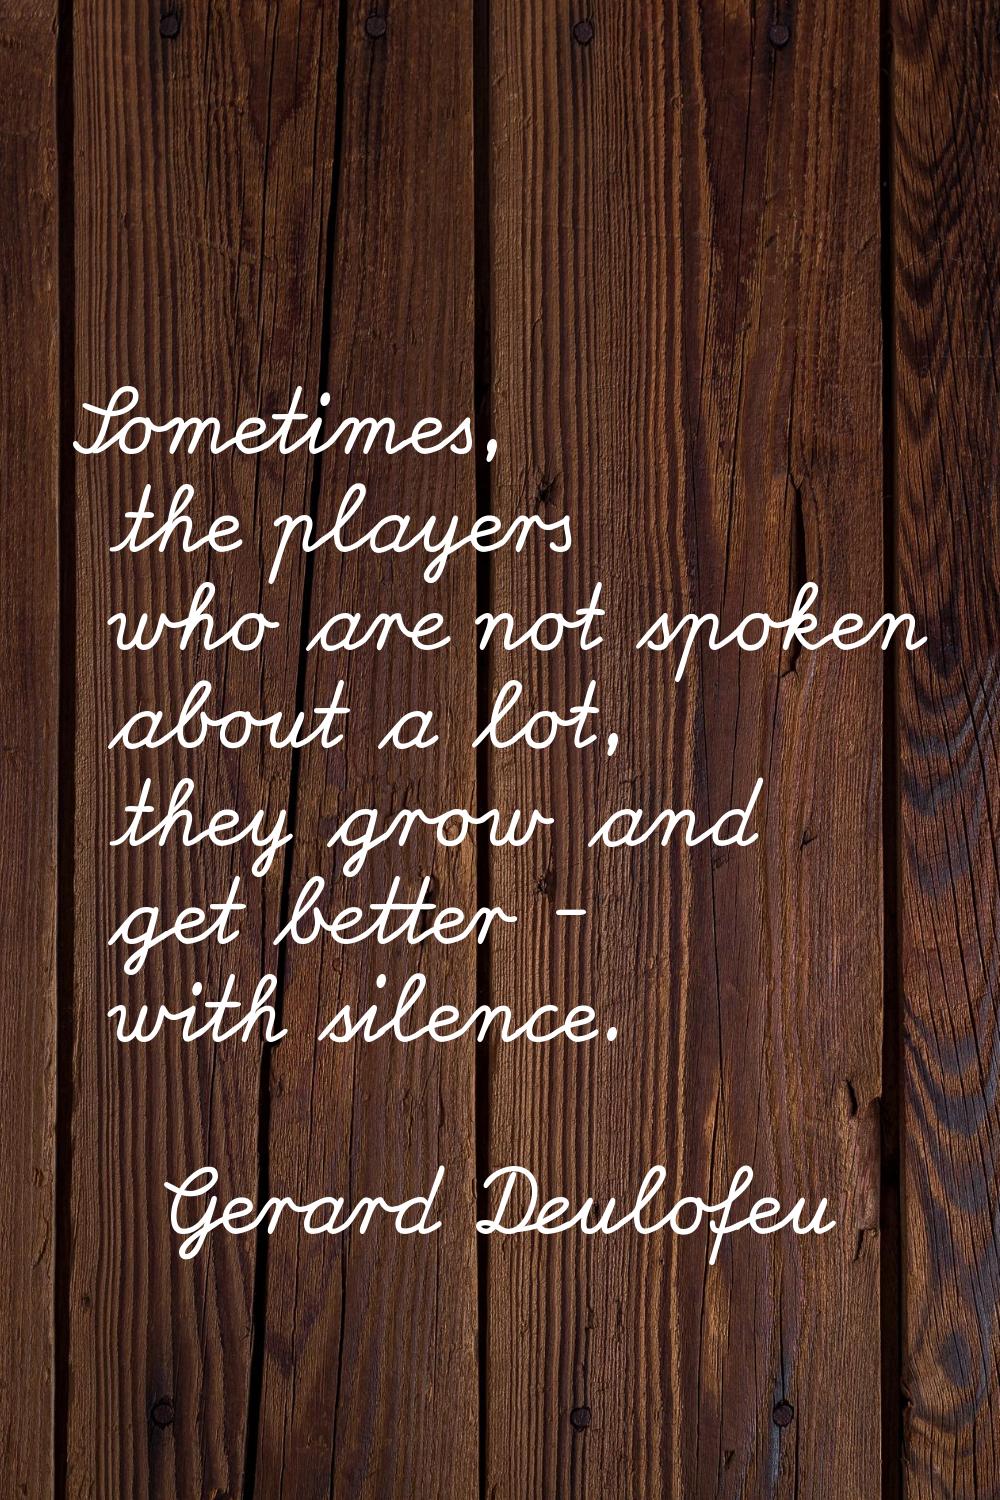 Sometimes, the players who are not spoken about a lot, they grow and get better - with silence.